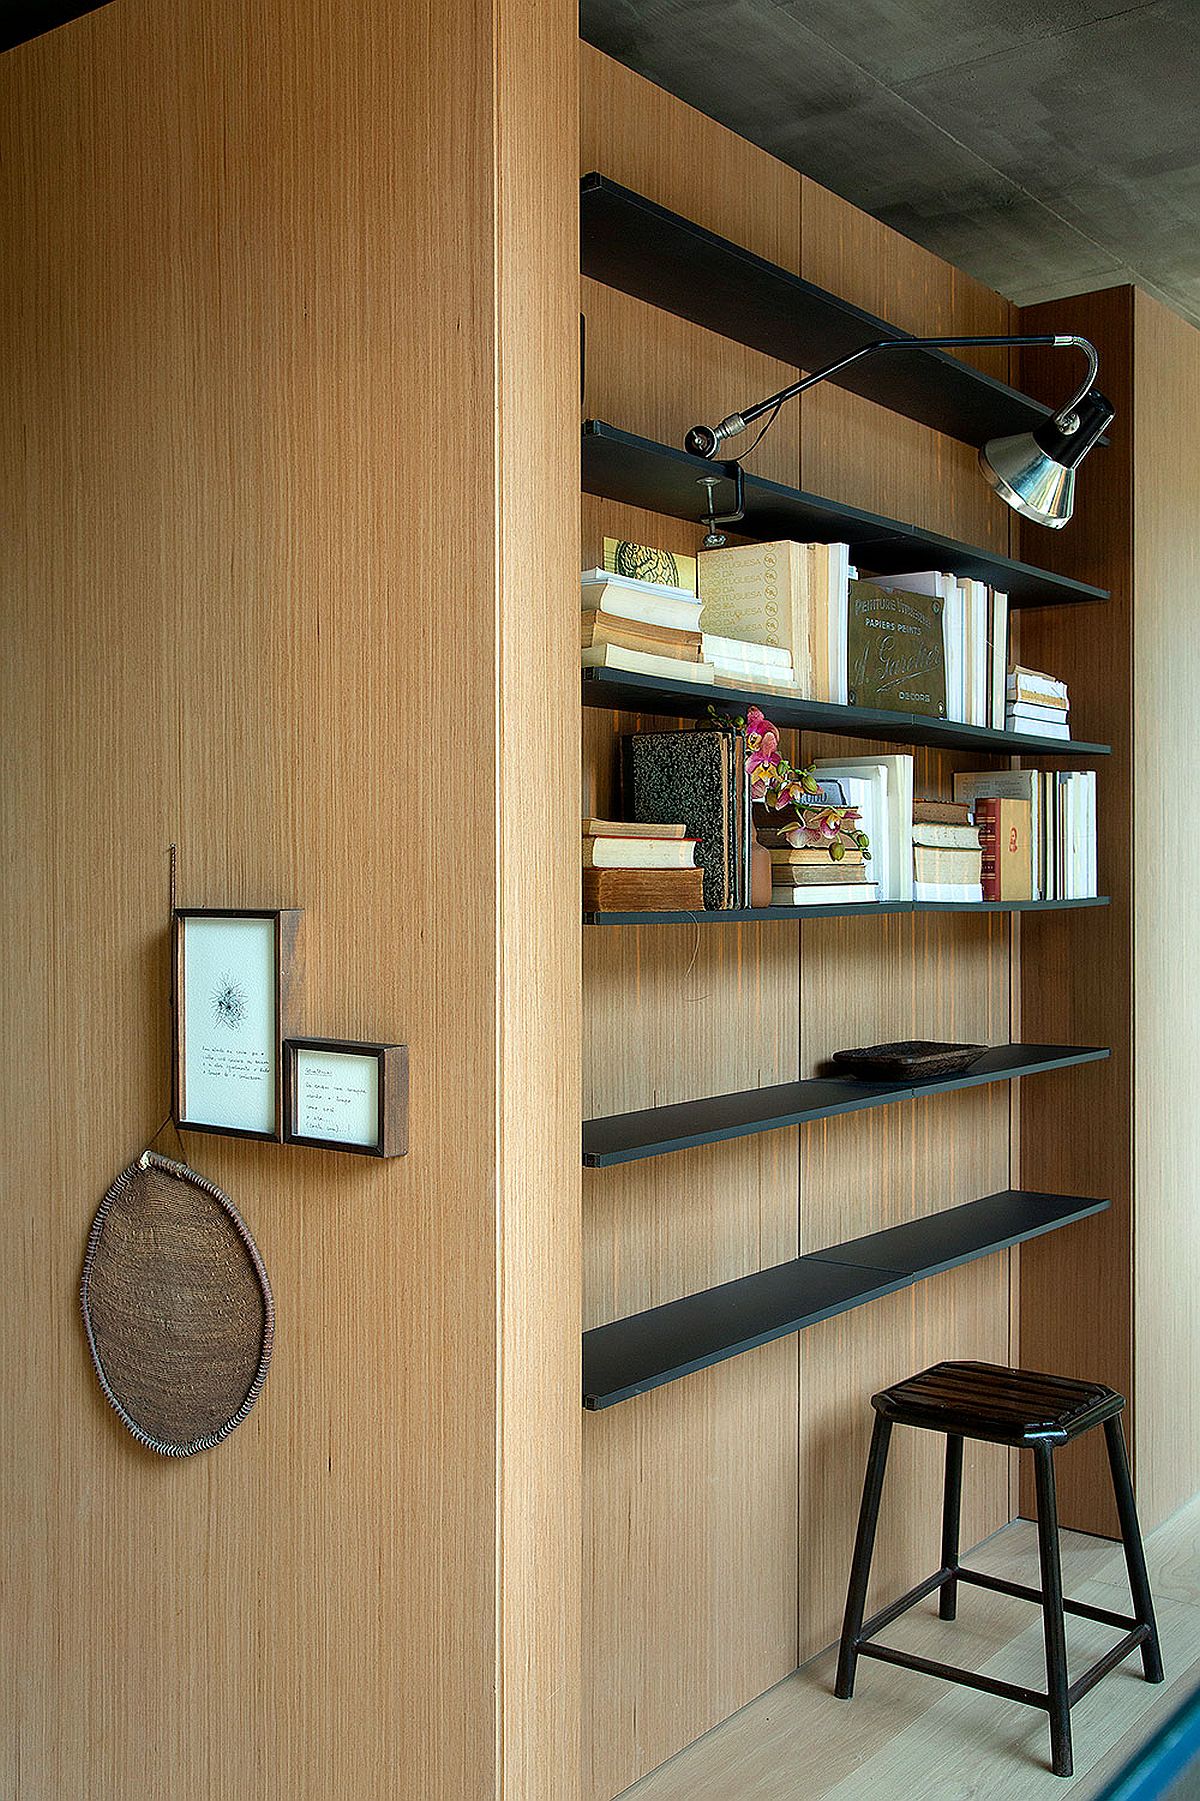 Using-slim-floating-shelves-inside-the-wardrobe-create-a-smart-workspace-in-the-bedroom-91848